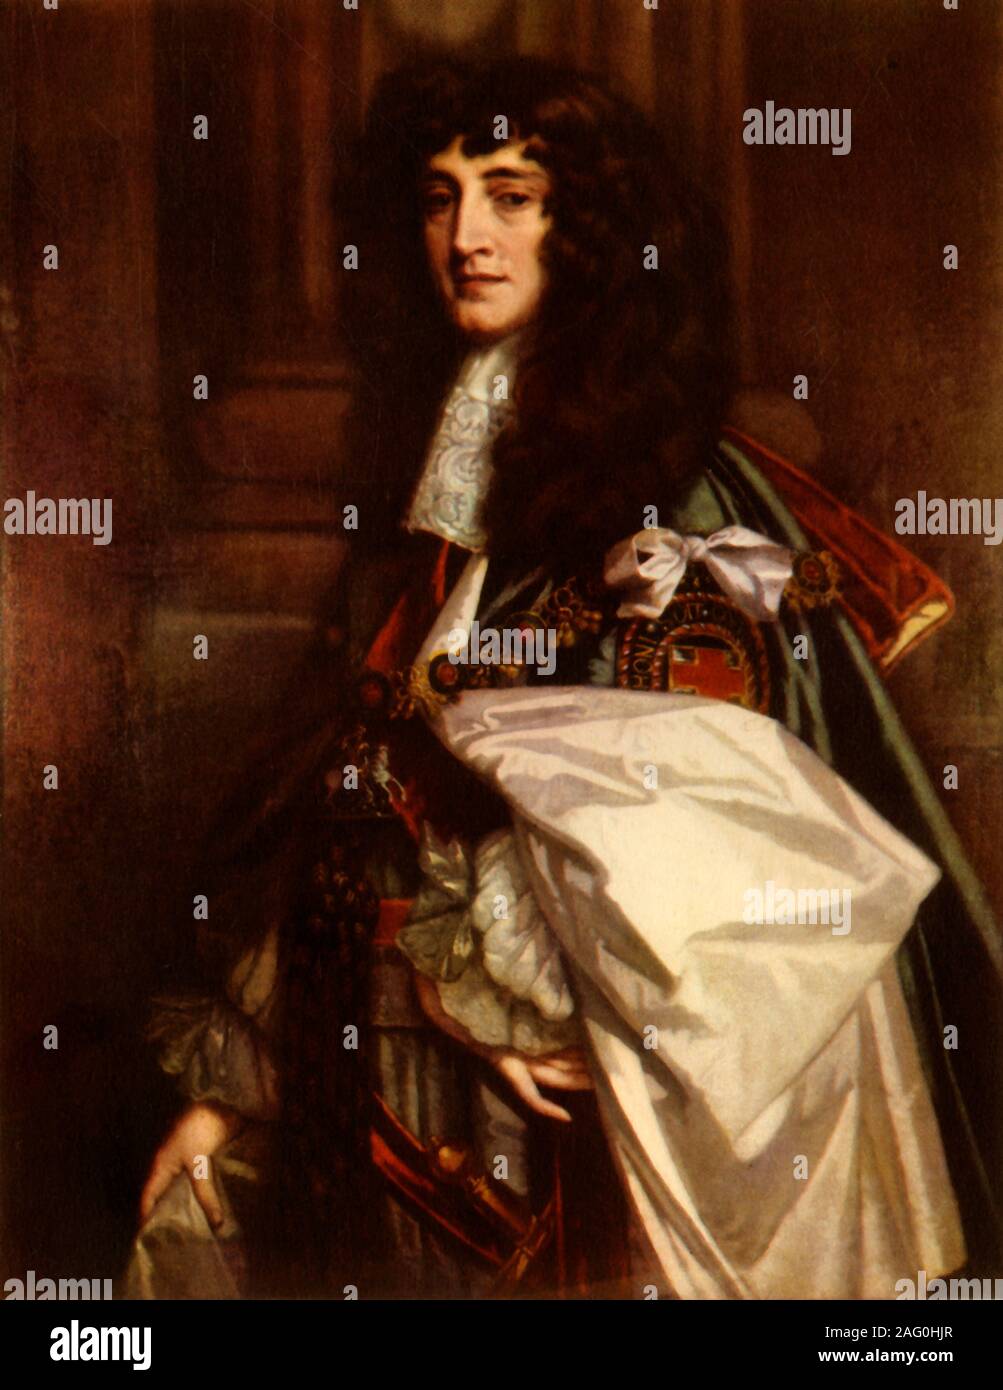 Prince Rupert, c1665, (1944). Portrait of Prince Rupert, 1st Duke of Cumberland and Count Palatine of the Rhine (1619-1682), wearing the robes of a Knight of the Garter. Rupert was a cavalry commander during the English Civil War (1642-1649), and became commander-in-chief of the Royalist land forces in 1644. After a painting by Peter Lely in the National Maritime Museum, London. From &quot;Battlefields in Britain', by C. V. Wedgwood. [Collins, London, 1944] Stock Photo